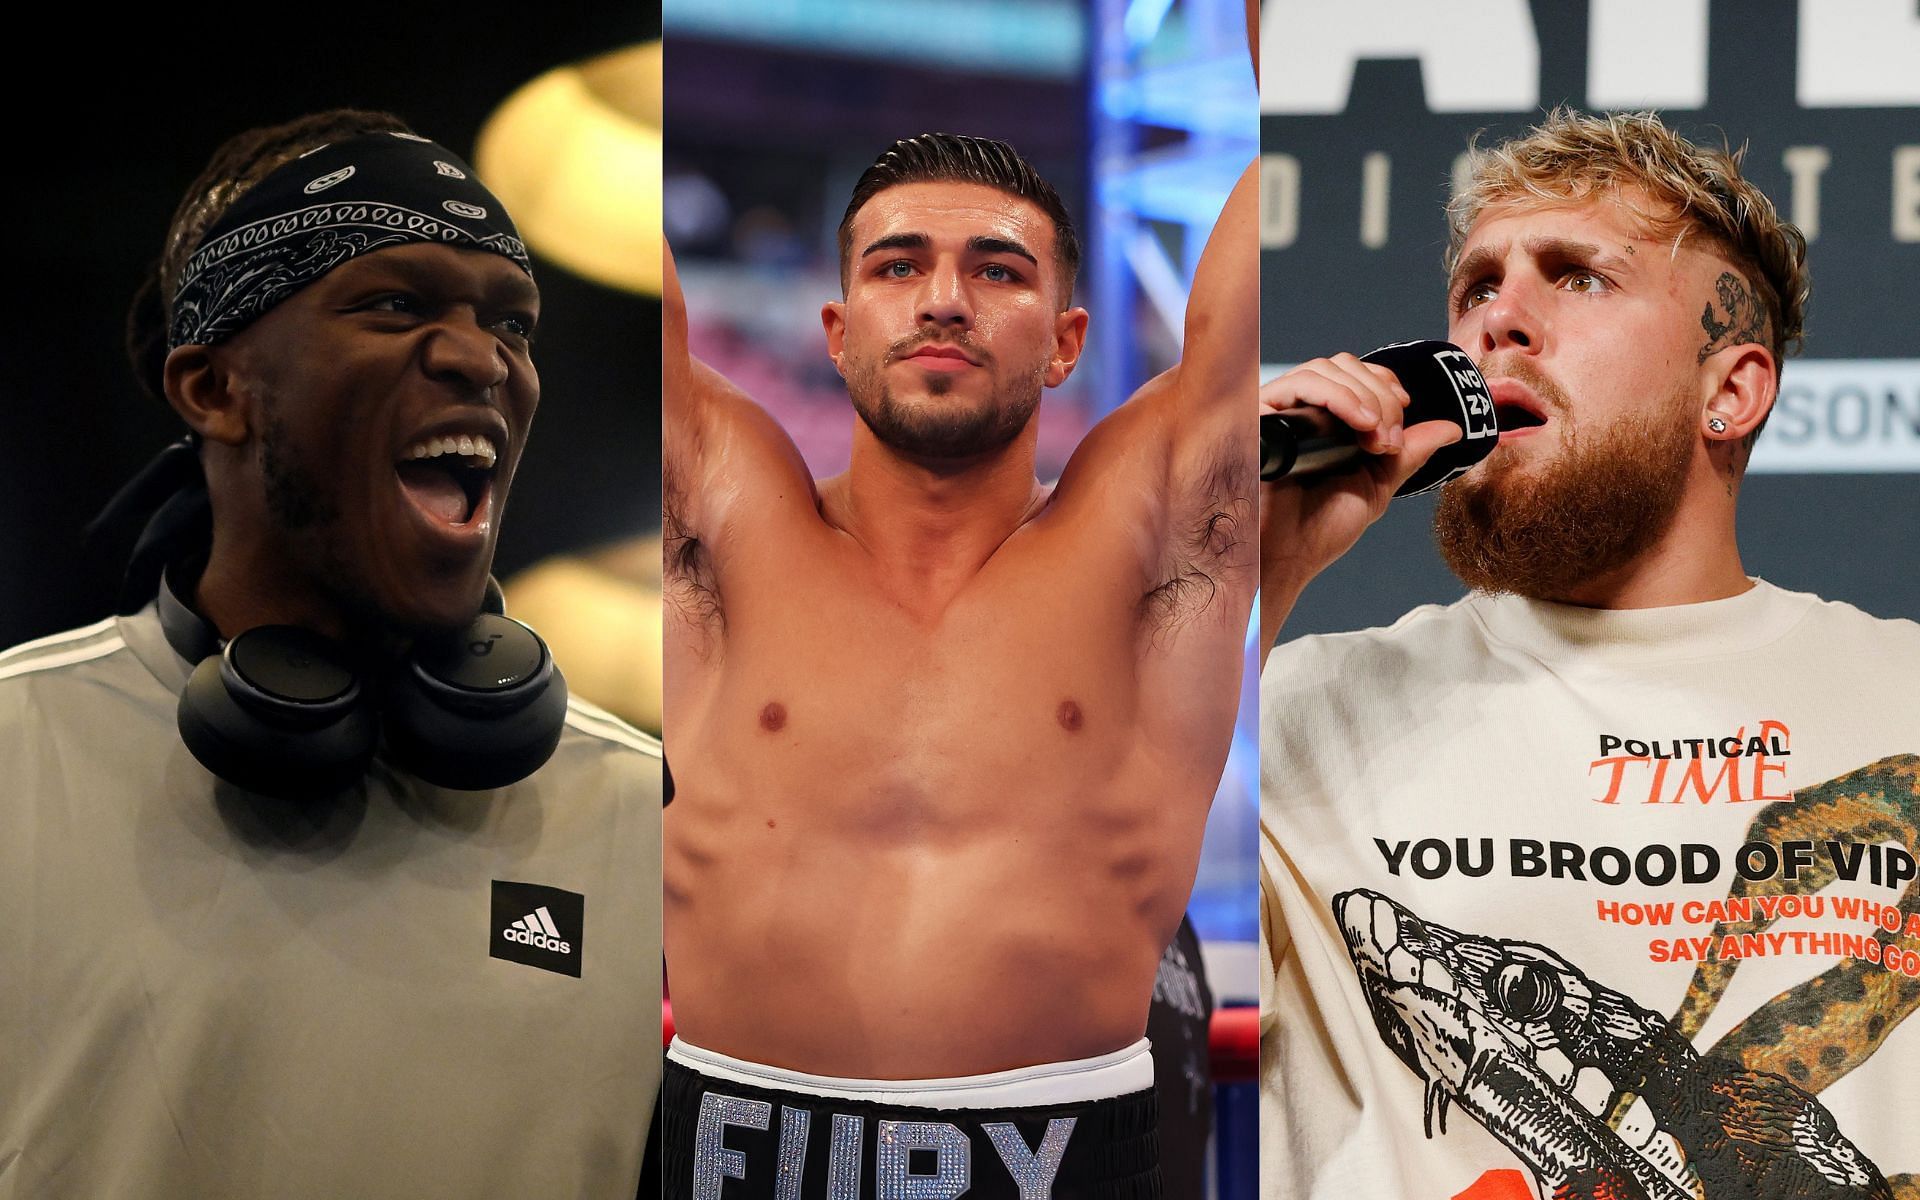 KSI (left) Tommy Fury (center), and Jake Paul (right) (Image credits Getty Images)